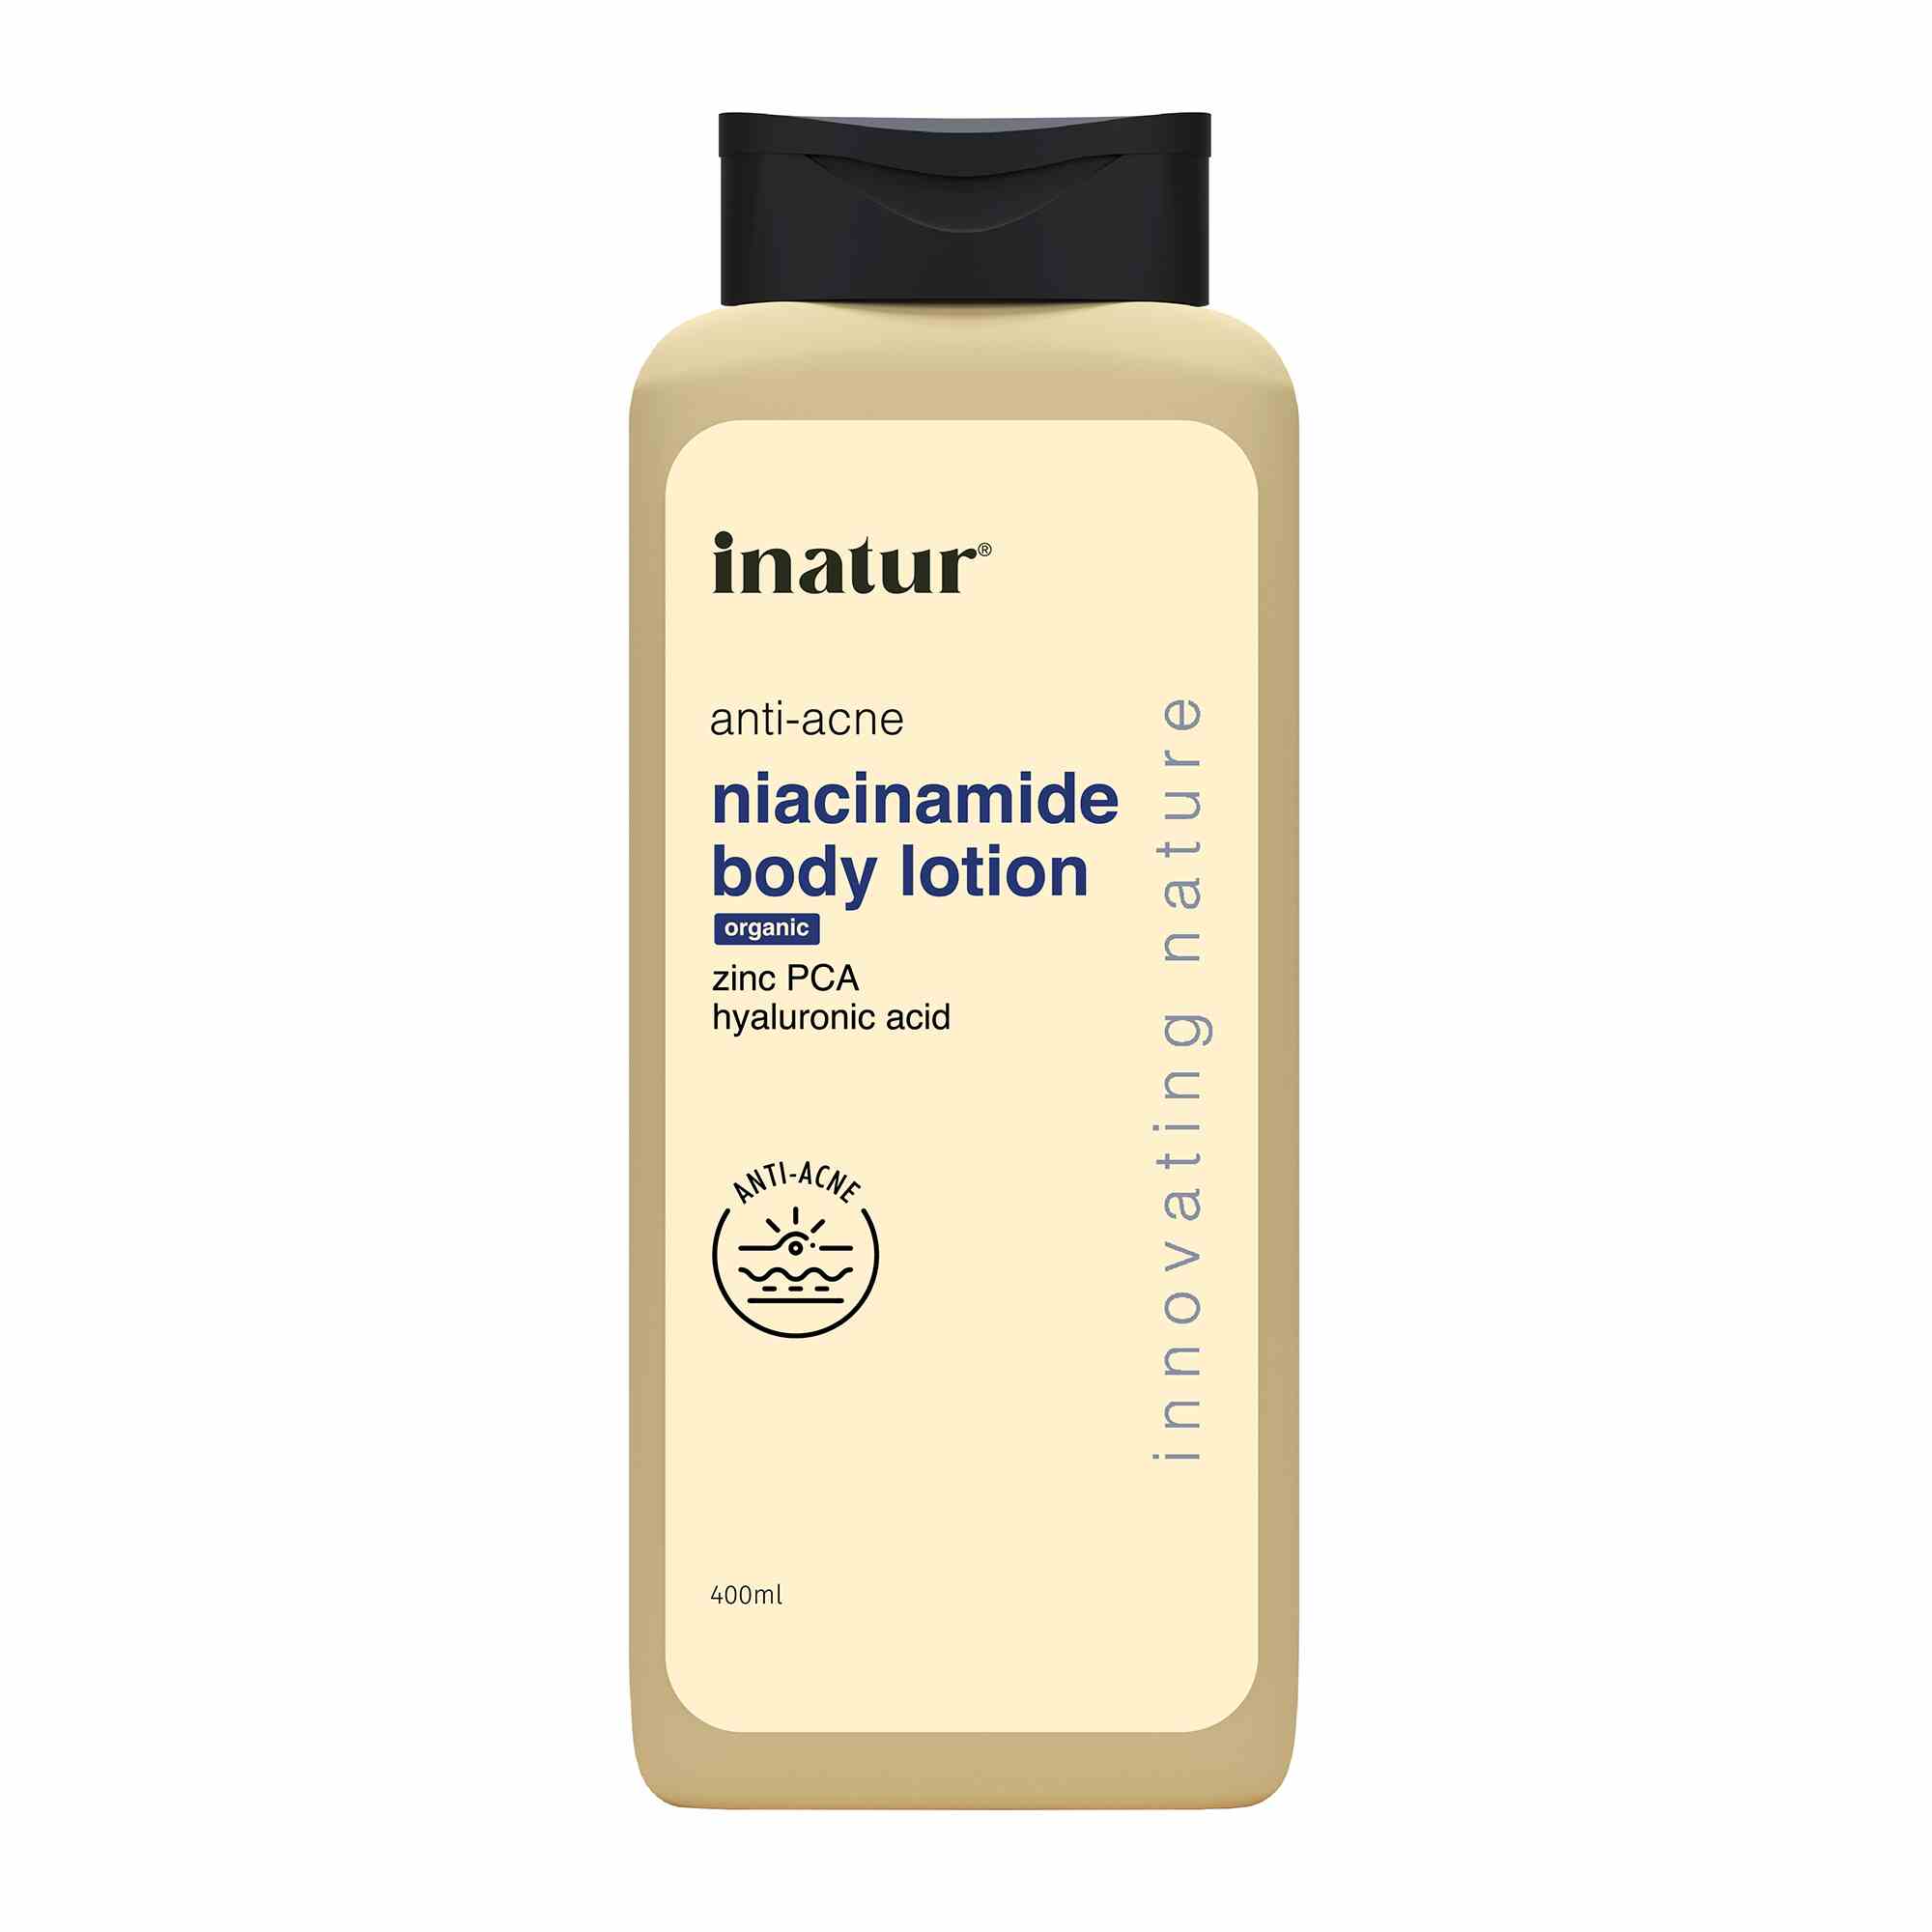 inatur niacinamide body lotion